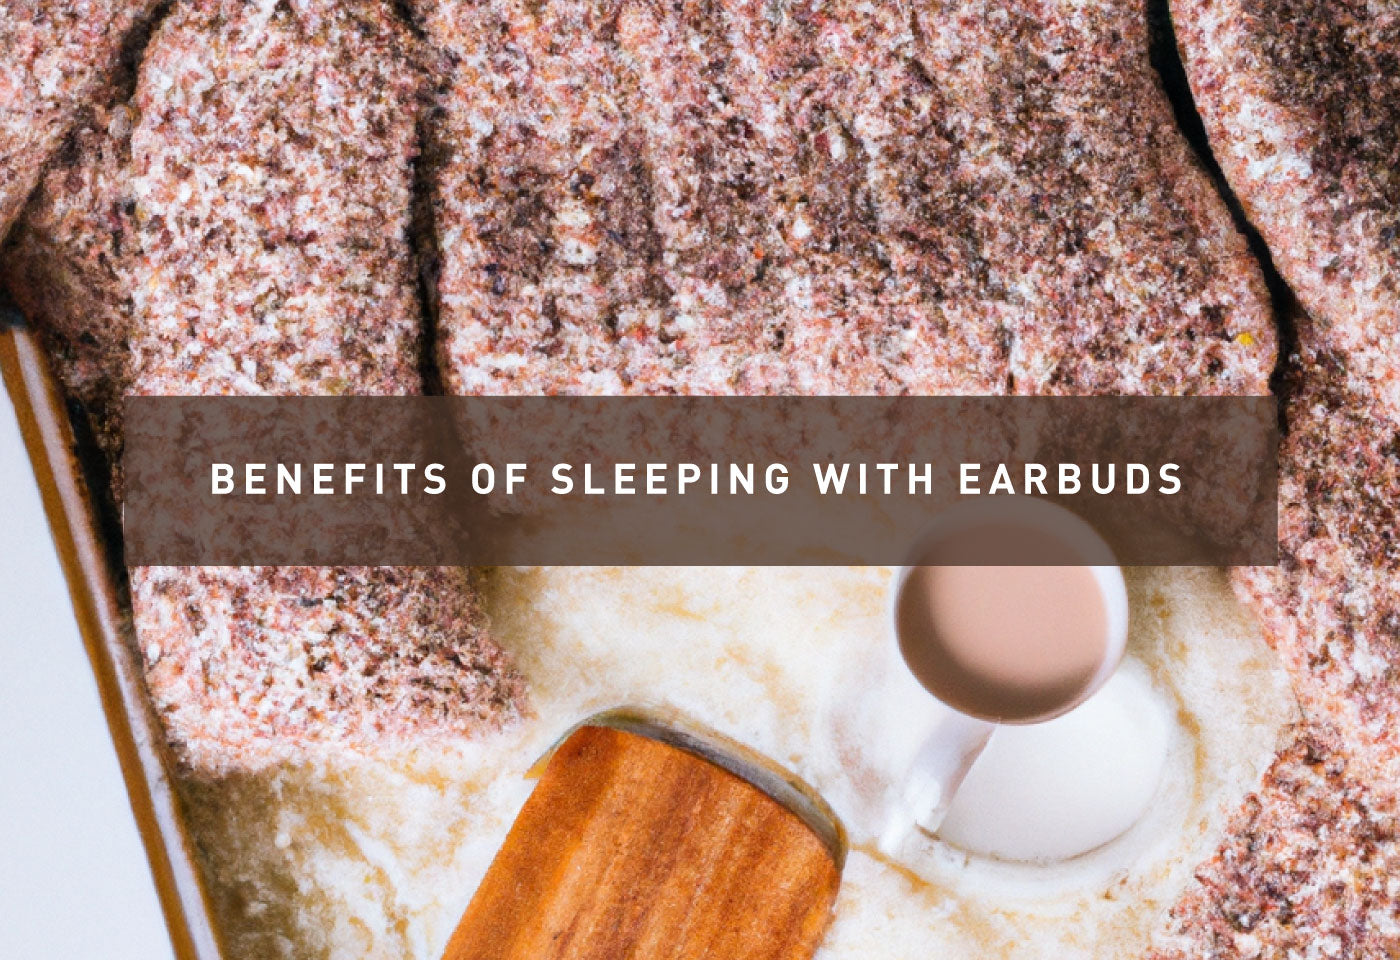 Benefits of Sleeping with Earbuds